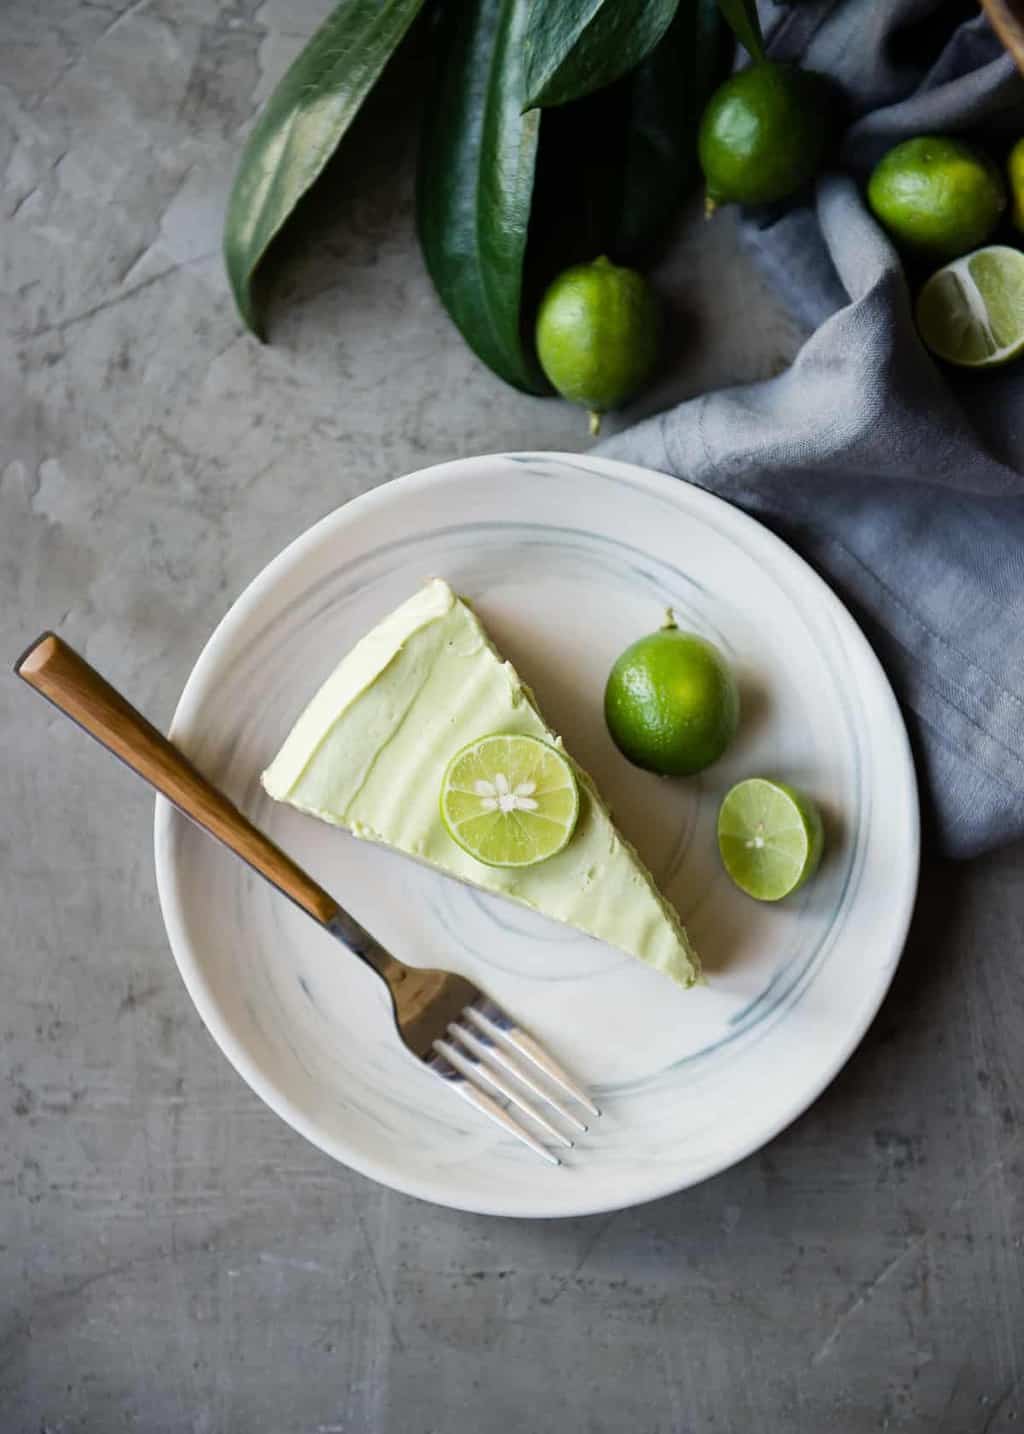 This Raw Key Lime Pie Is the Perfect Summer Dessert